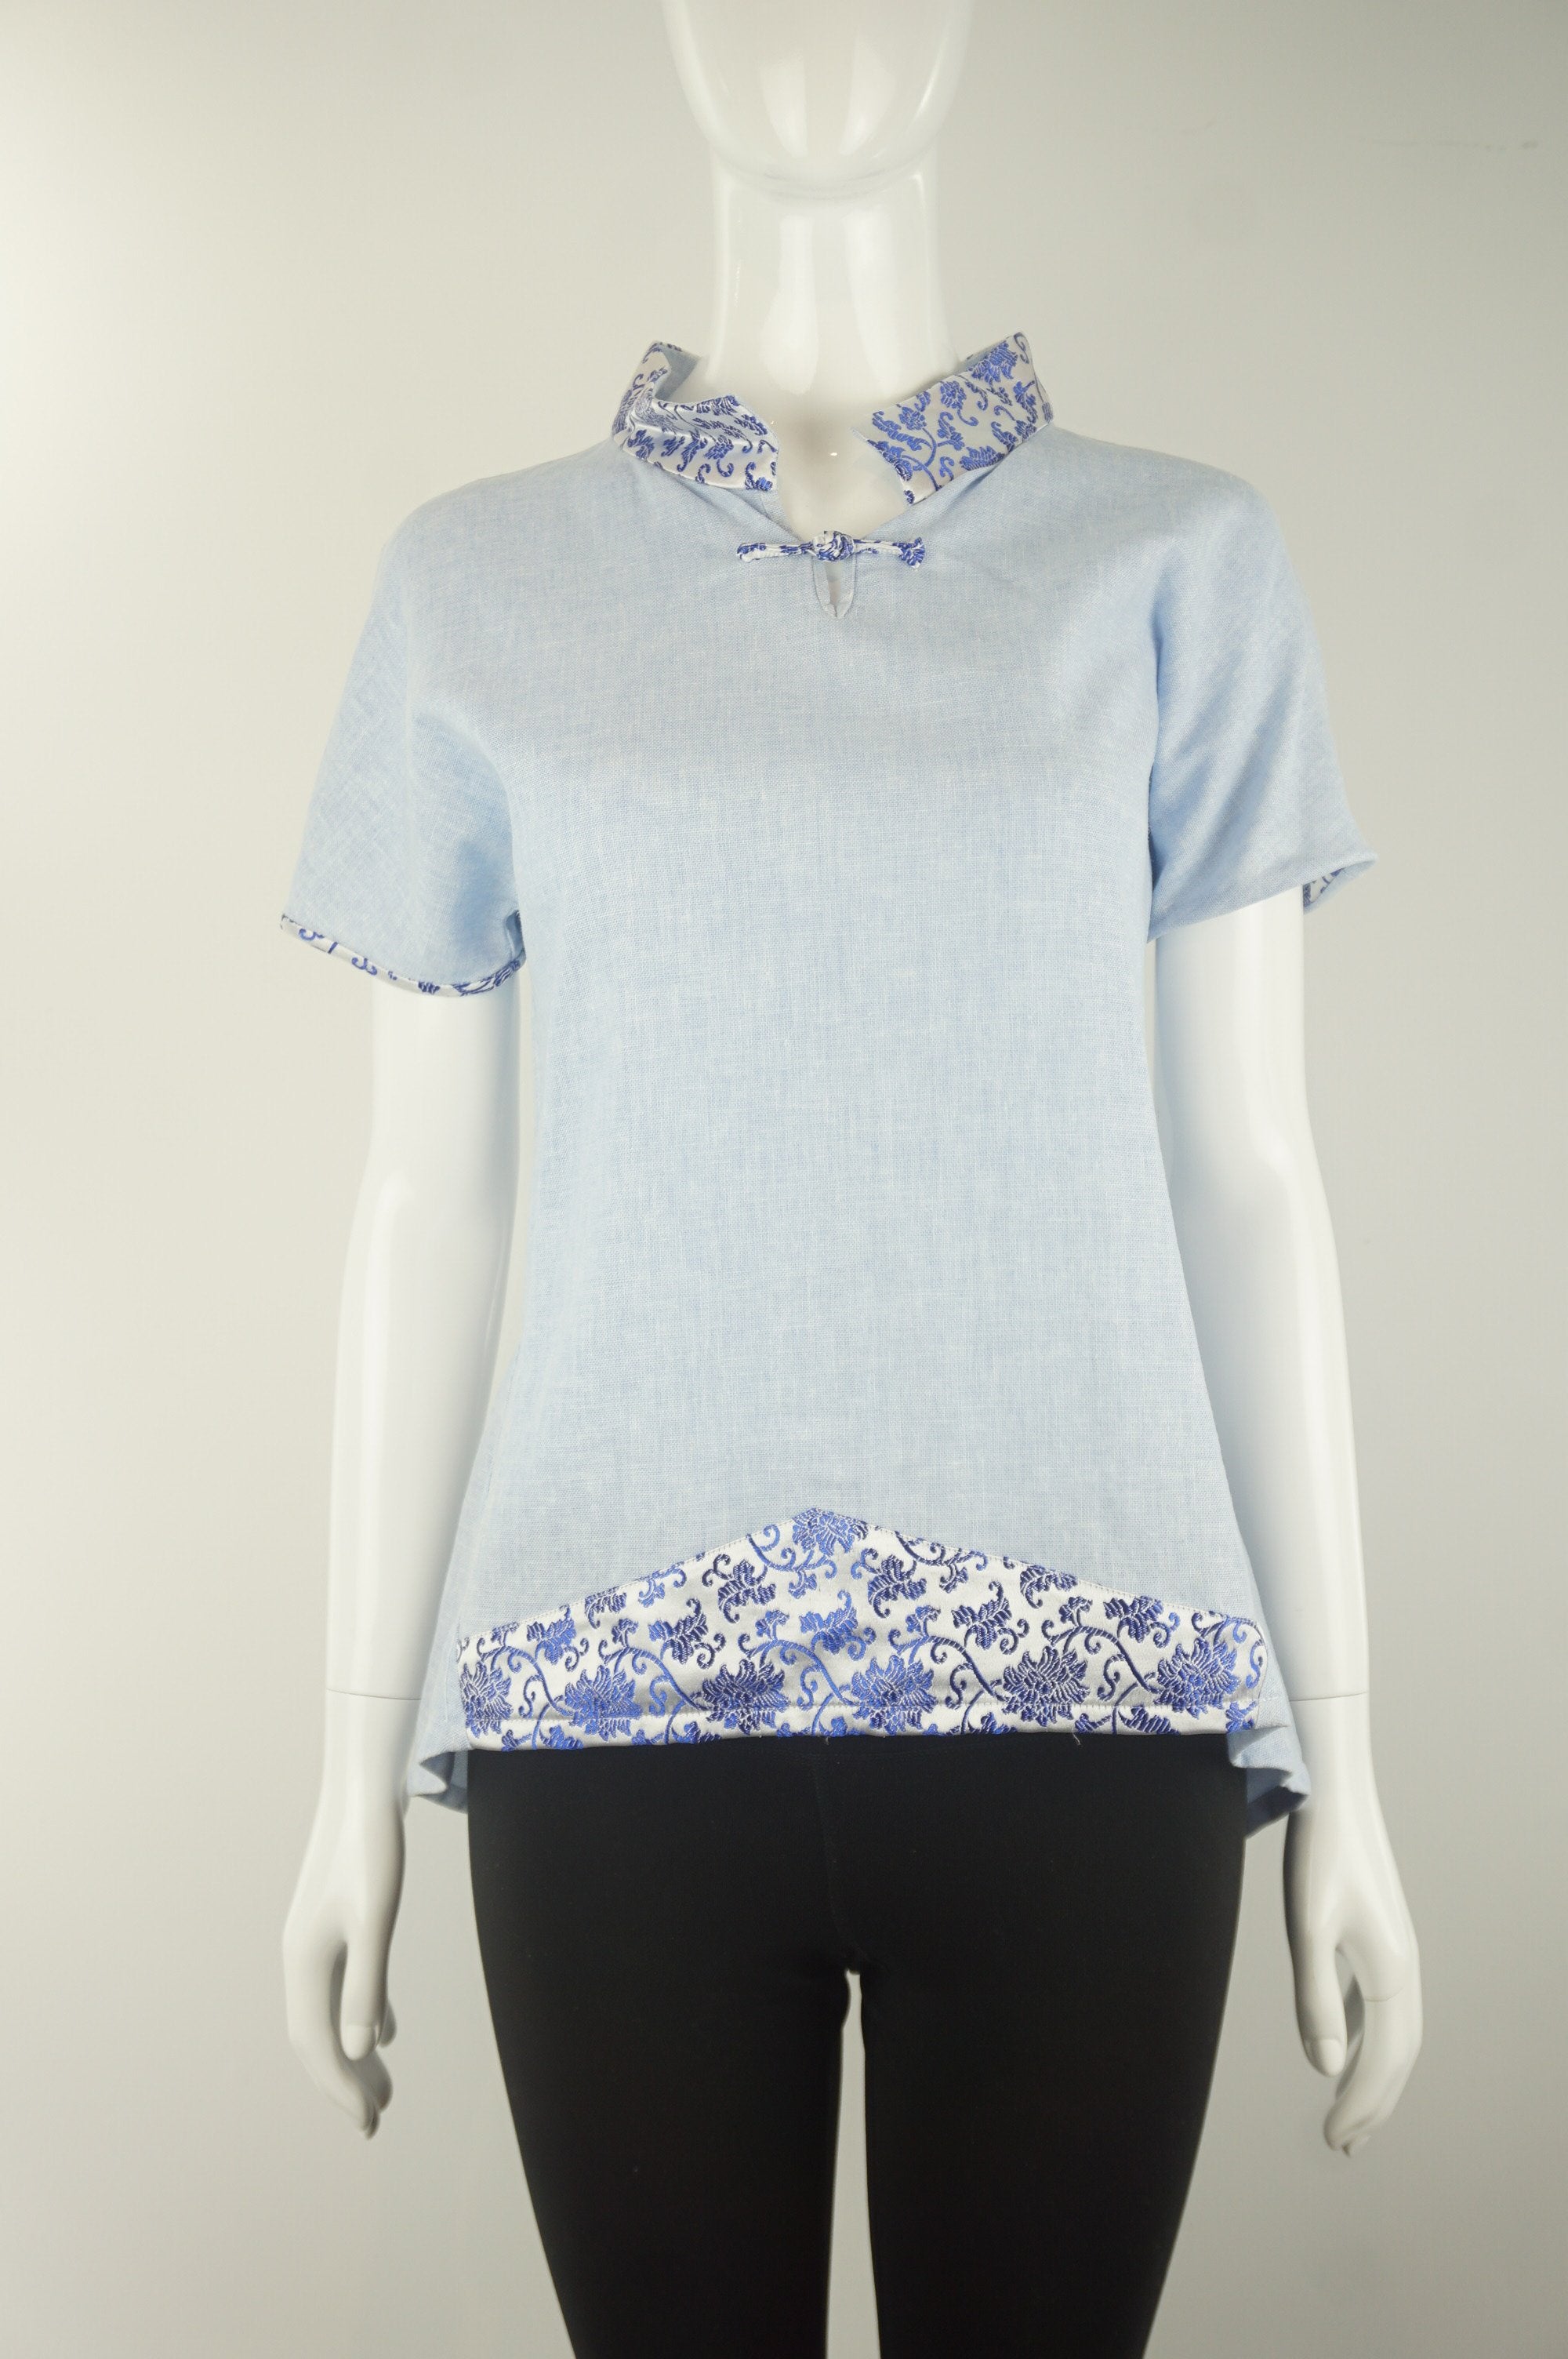 Elli Share Traditional Chinese Style Inspired Top, Unique design featuring traditional Chinese cultural elements but creative modern design. One of a kind grab., Blue, White, Linen, women's Tops, women's Blue, White Tops, Elli Share women's Tops, elegant top, traditional Chinese style top maderin collar, linen shirt, comfortable qibao inspired linen shirt